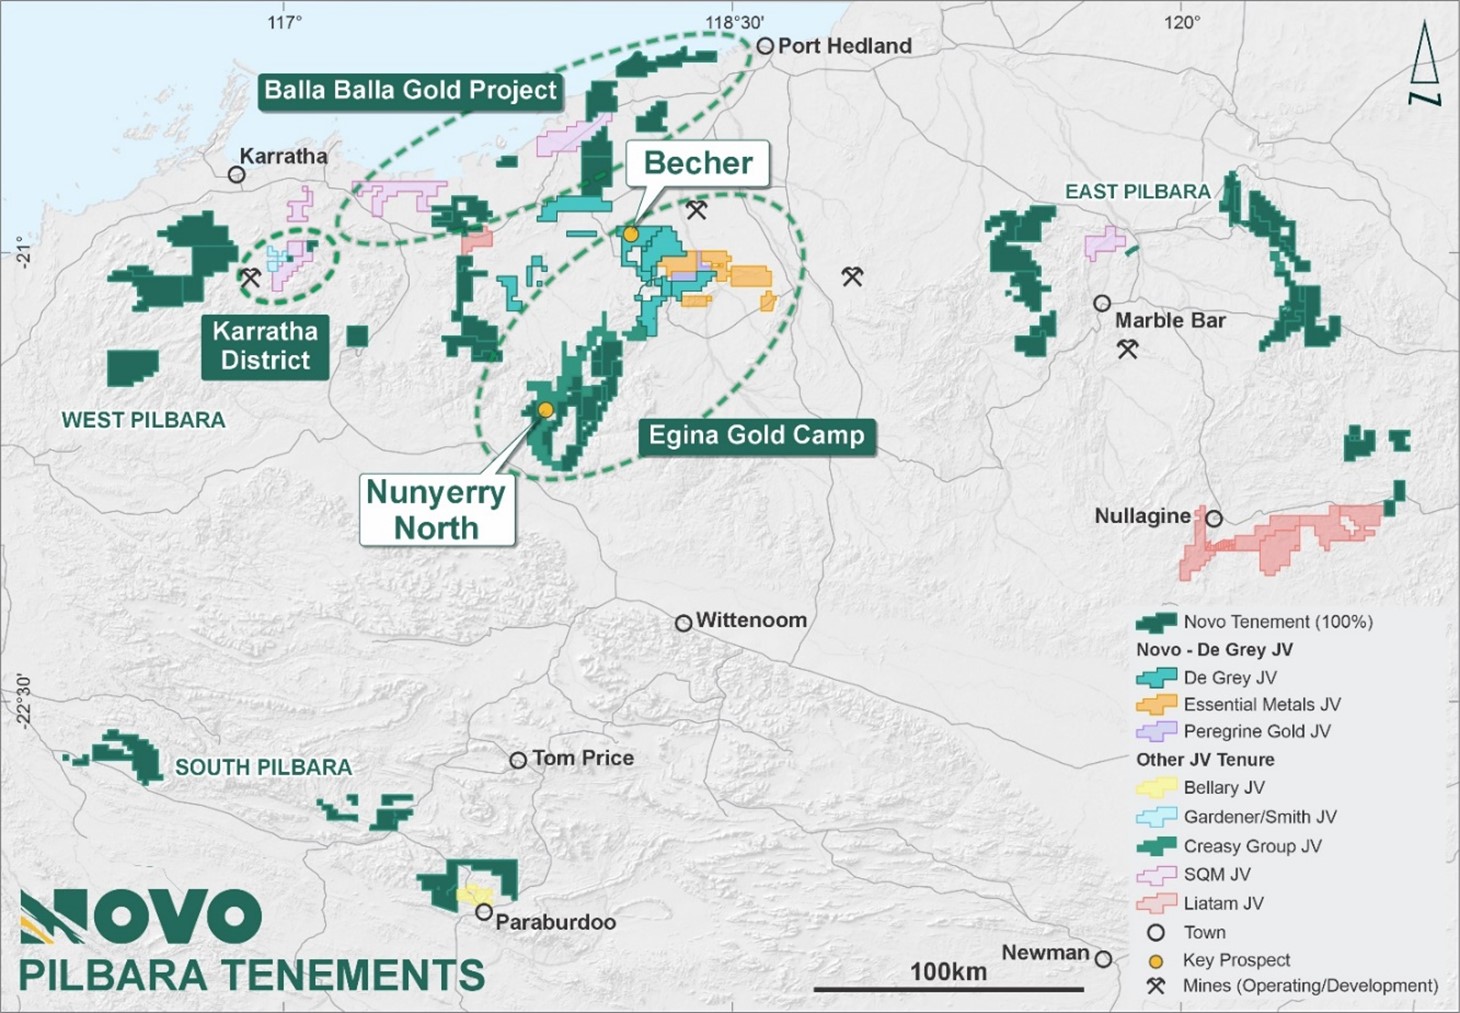 Novo Pilbara tenure showing main projects and significant prospect